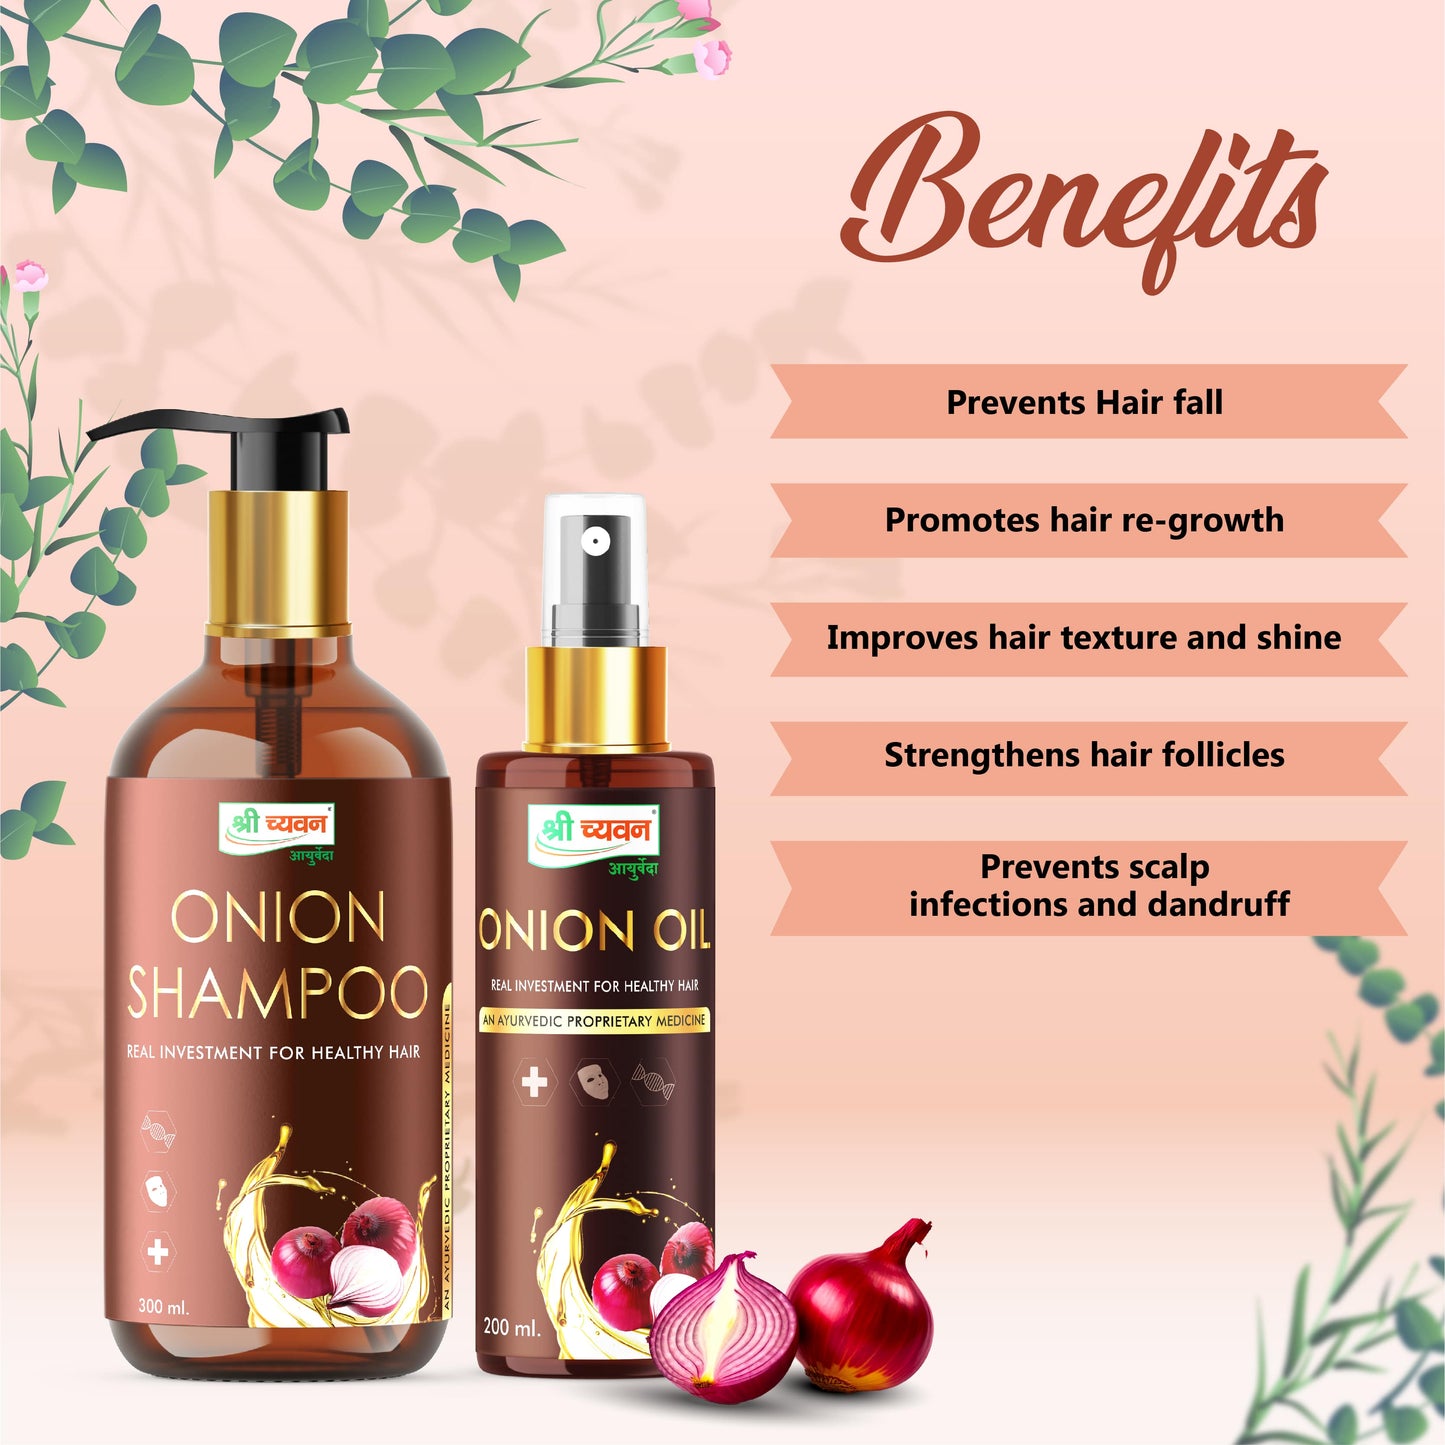 Onion Oil and Shampoo for hair regrowth